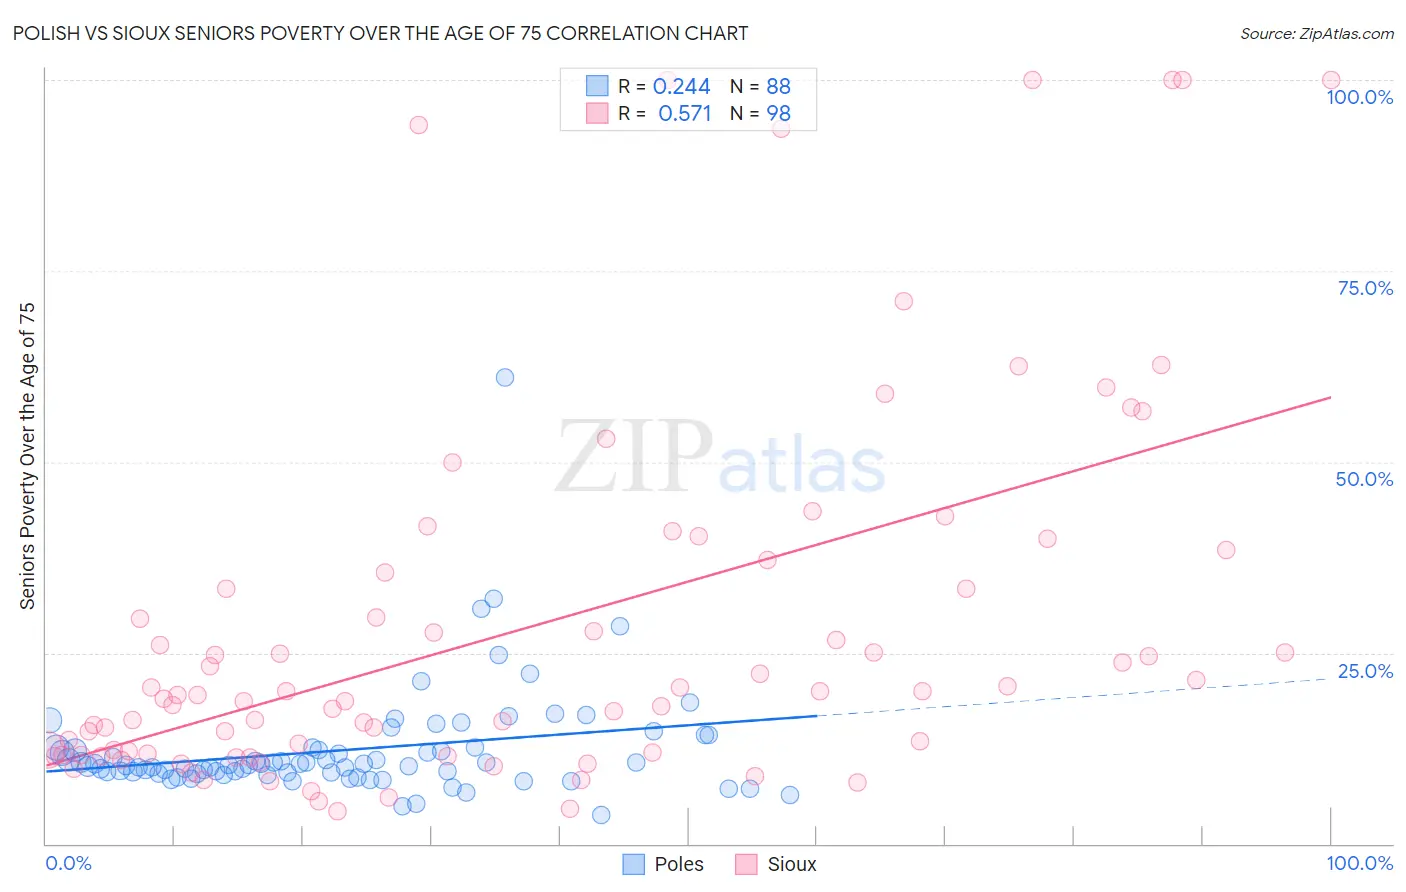 Polish vs Sioux Seniors Poverty Over the Age of 75